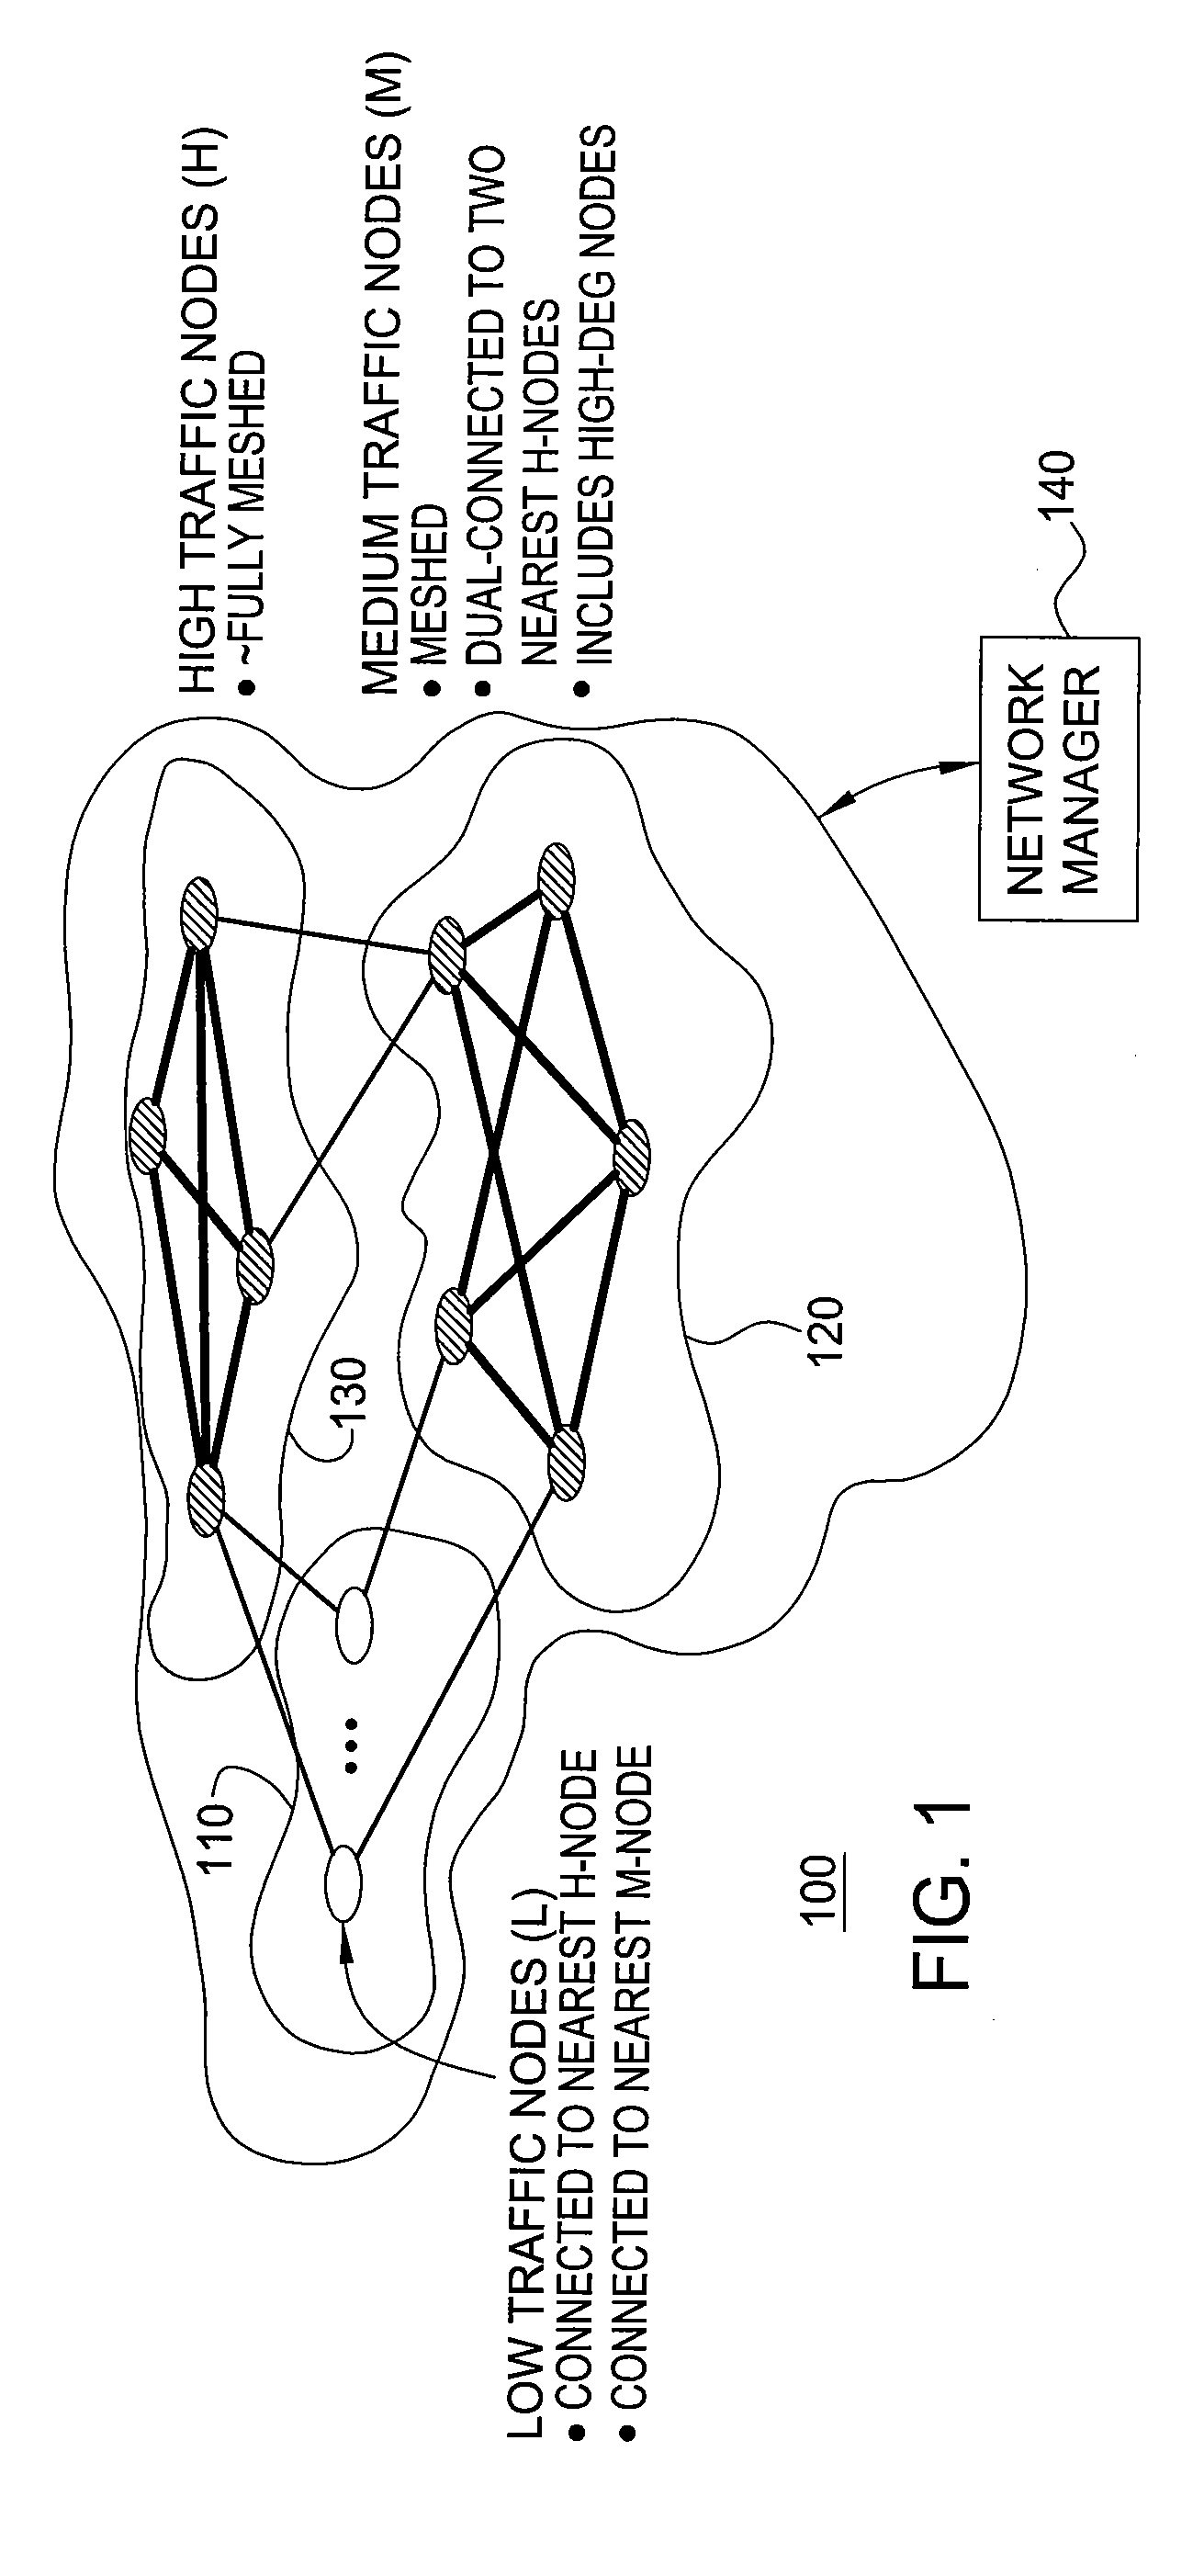 Method and System for Efficient Provisioning of Multiple Services for Multiple Failure Restoration in Multi-Layer Mesh Networks